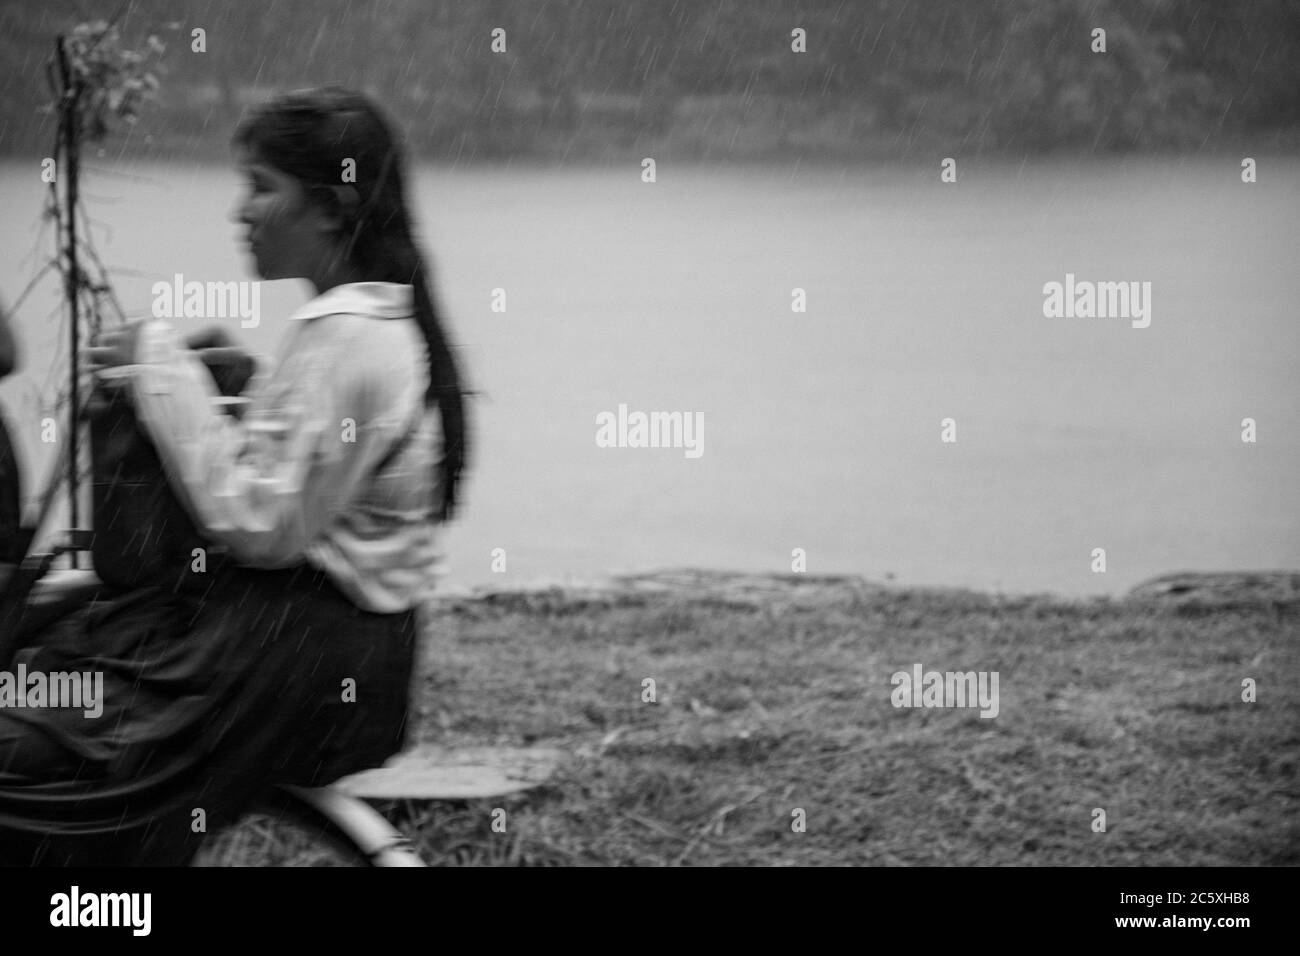 Blurred young female student on a bicycle on a rainy day in Angkor Wat temple area. Siem Reap, Cambodia. Stock Photo